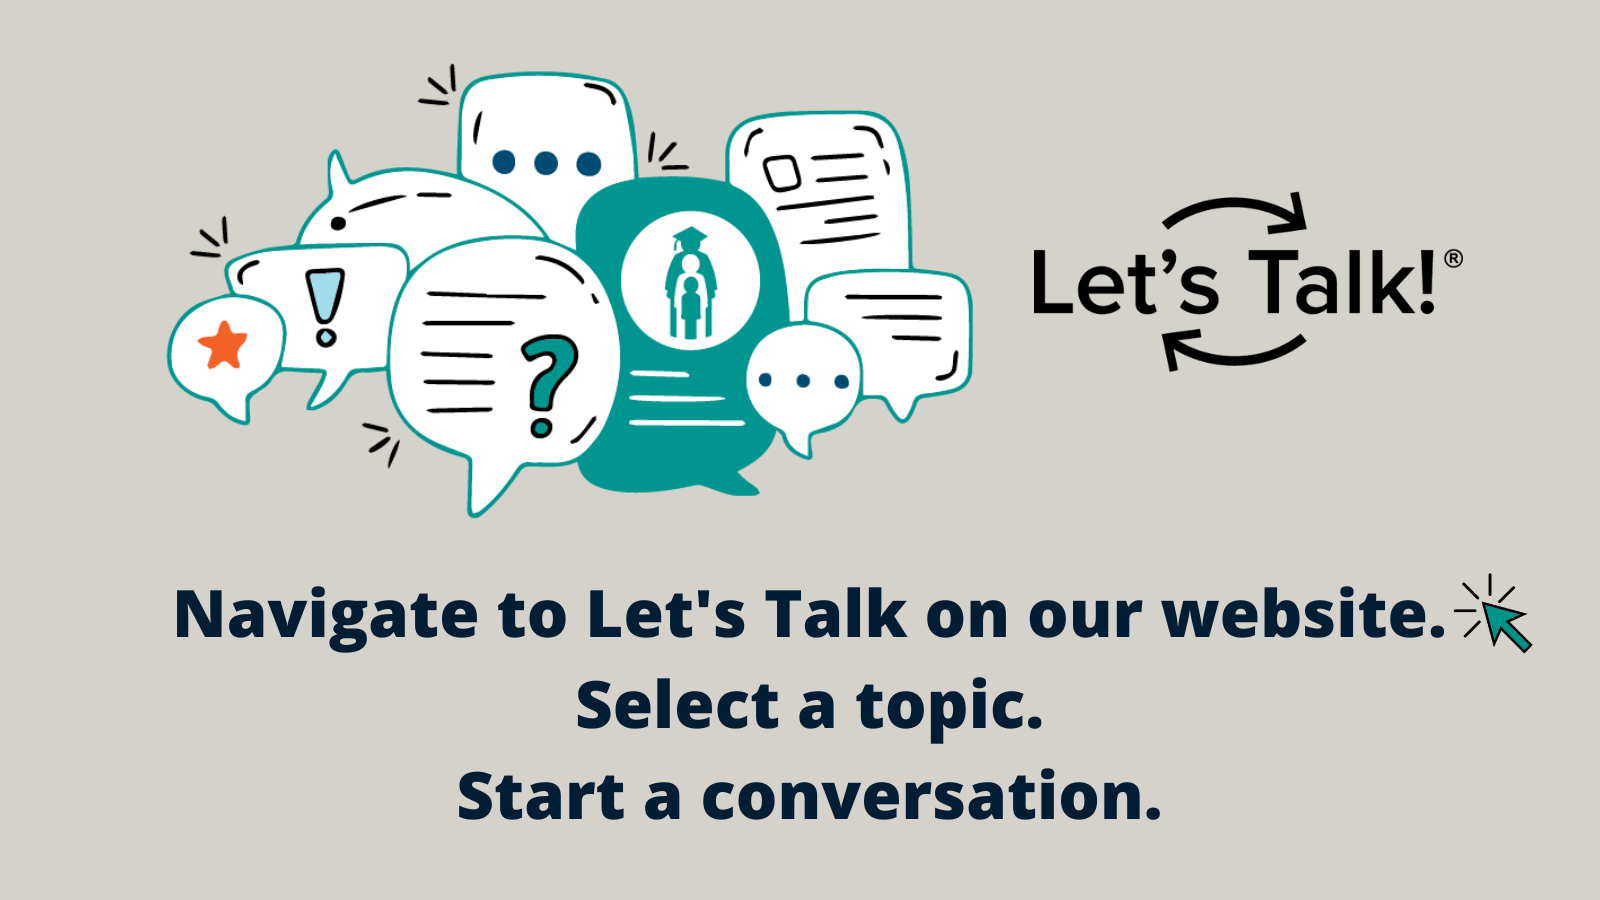 A collage of various speech bubbles appears above text that reads, "Navigate to Let's Talk on our website. Select a topic. Start a conversation. Let's Talk." Image sized for Twitter.